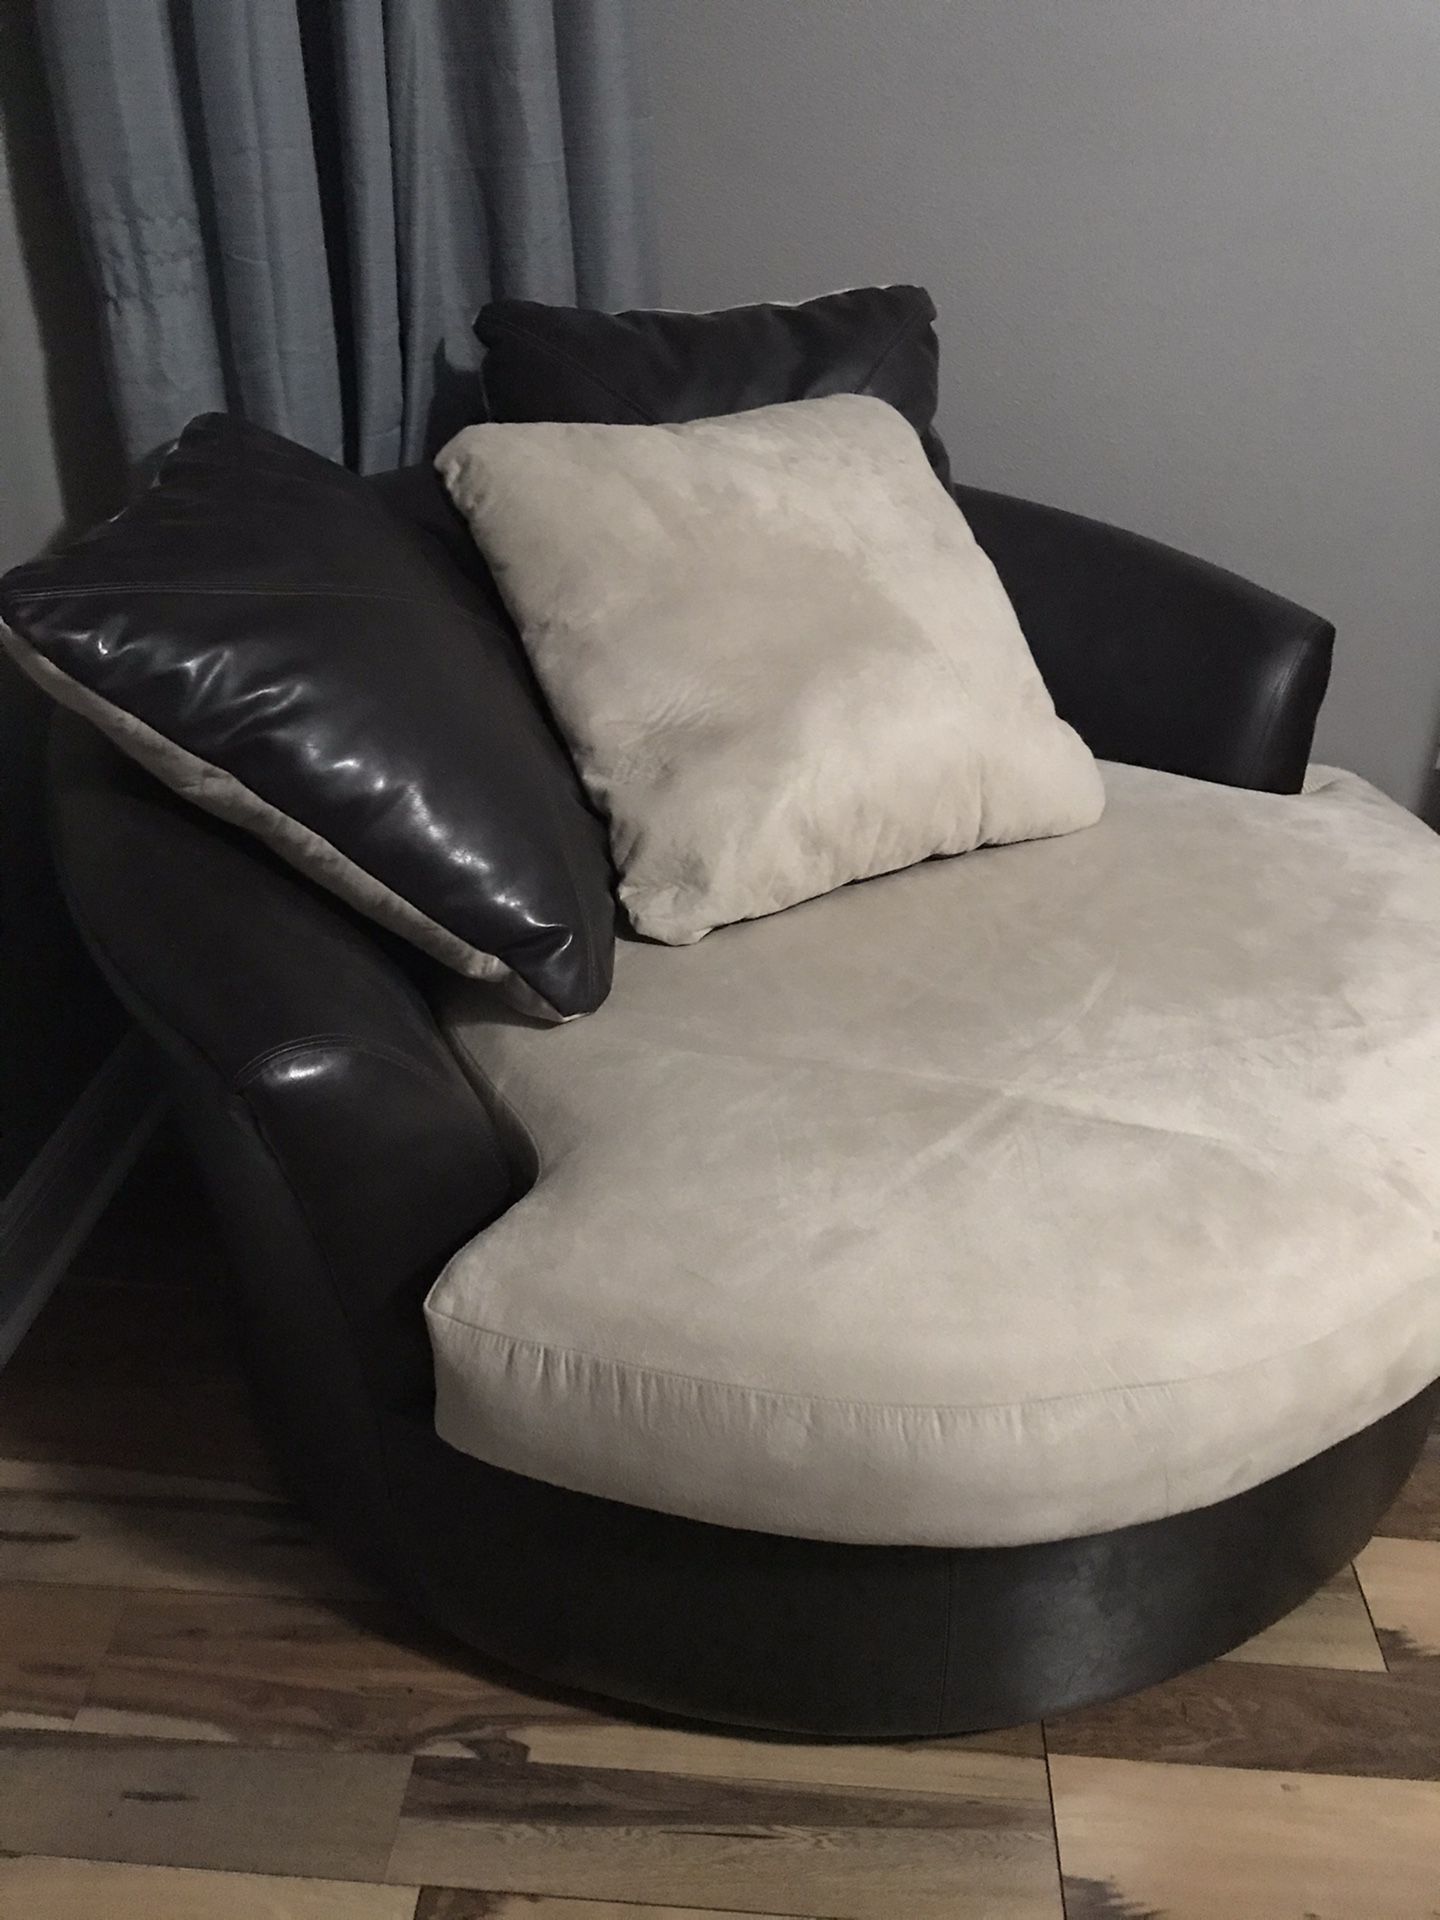 Ashley Furniture Micro fiber oversized round swivel chair in excellent condition